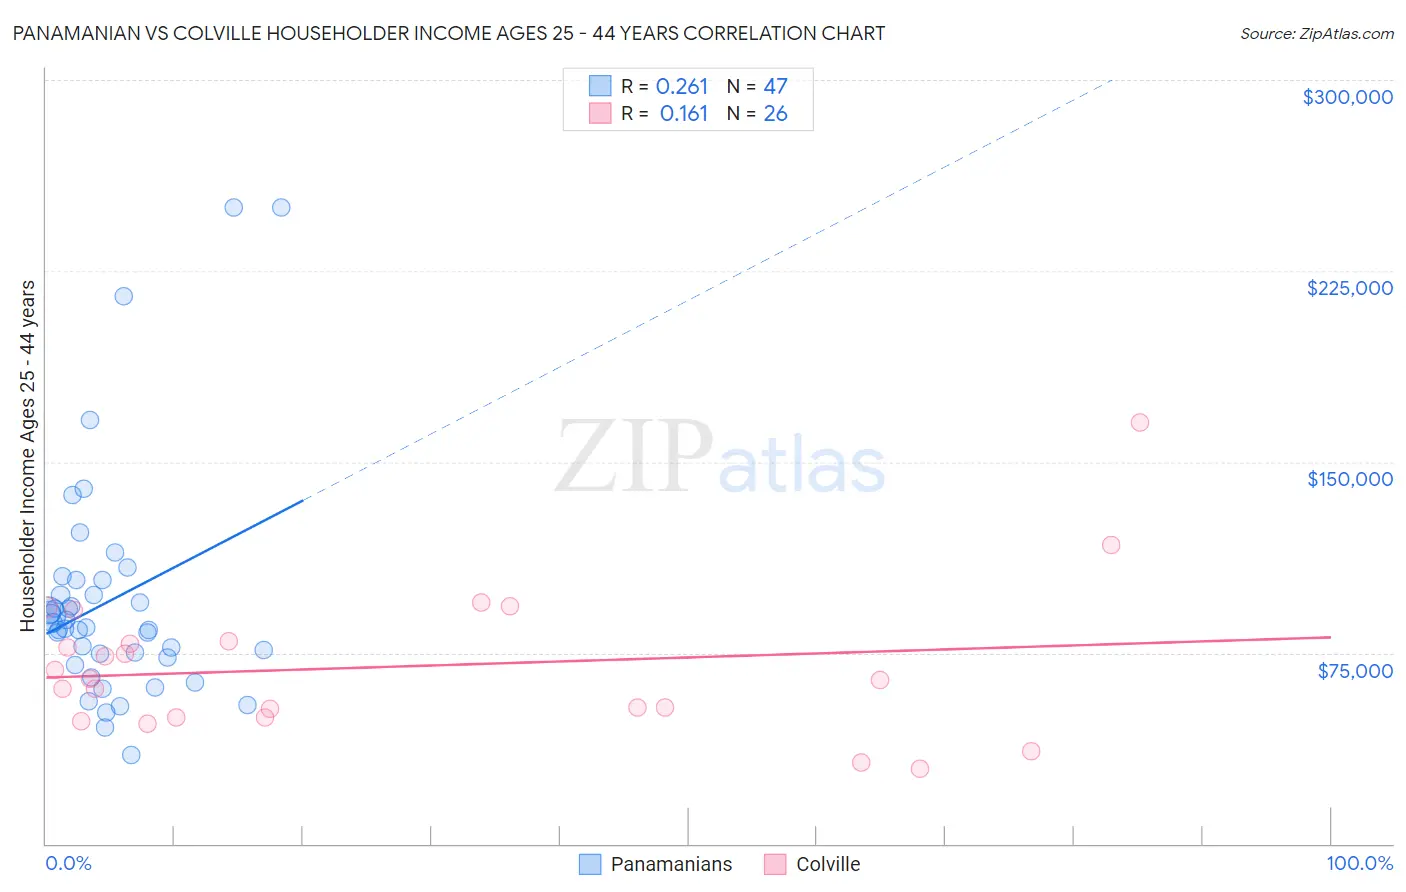 Panamanian vs Colville Householder Income Ages 25 - 44 years